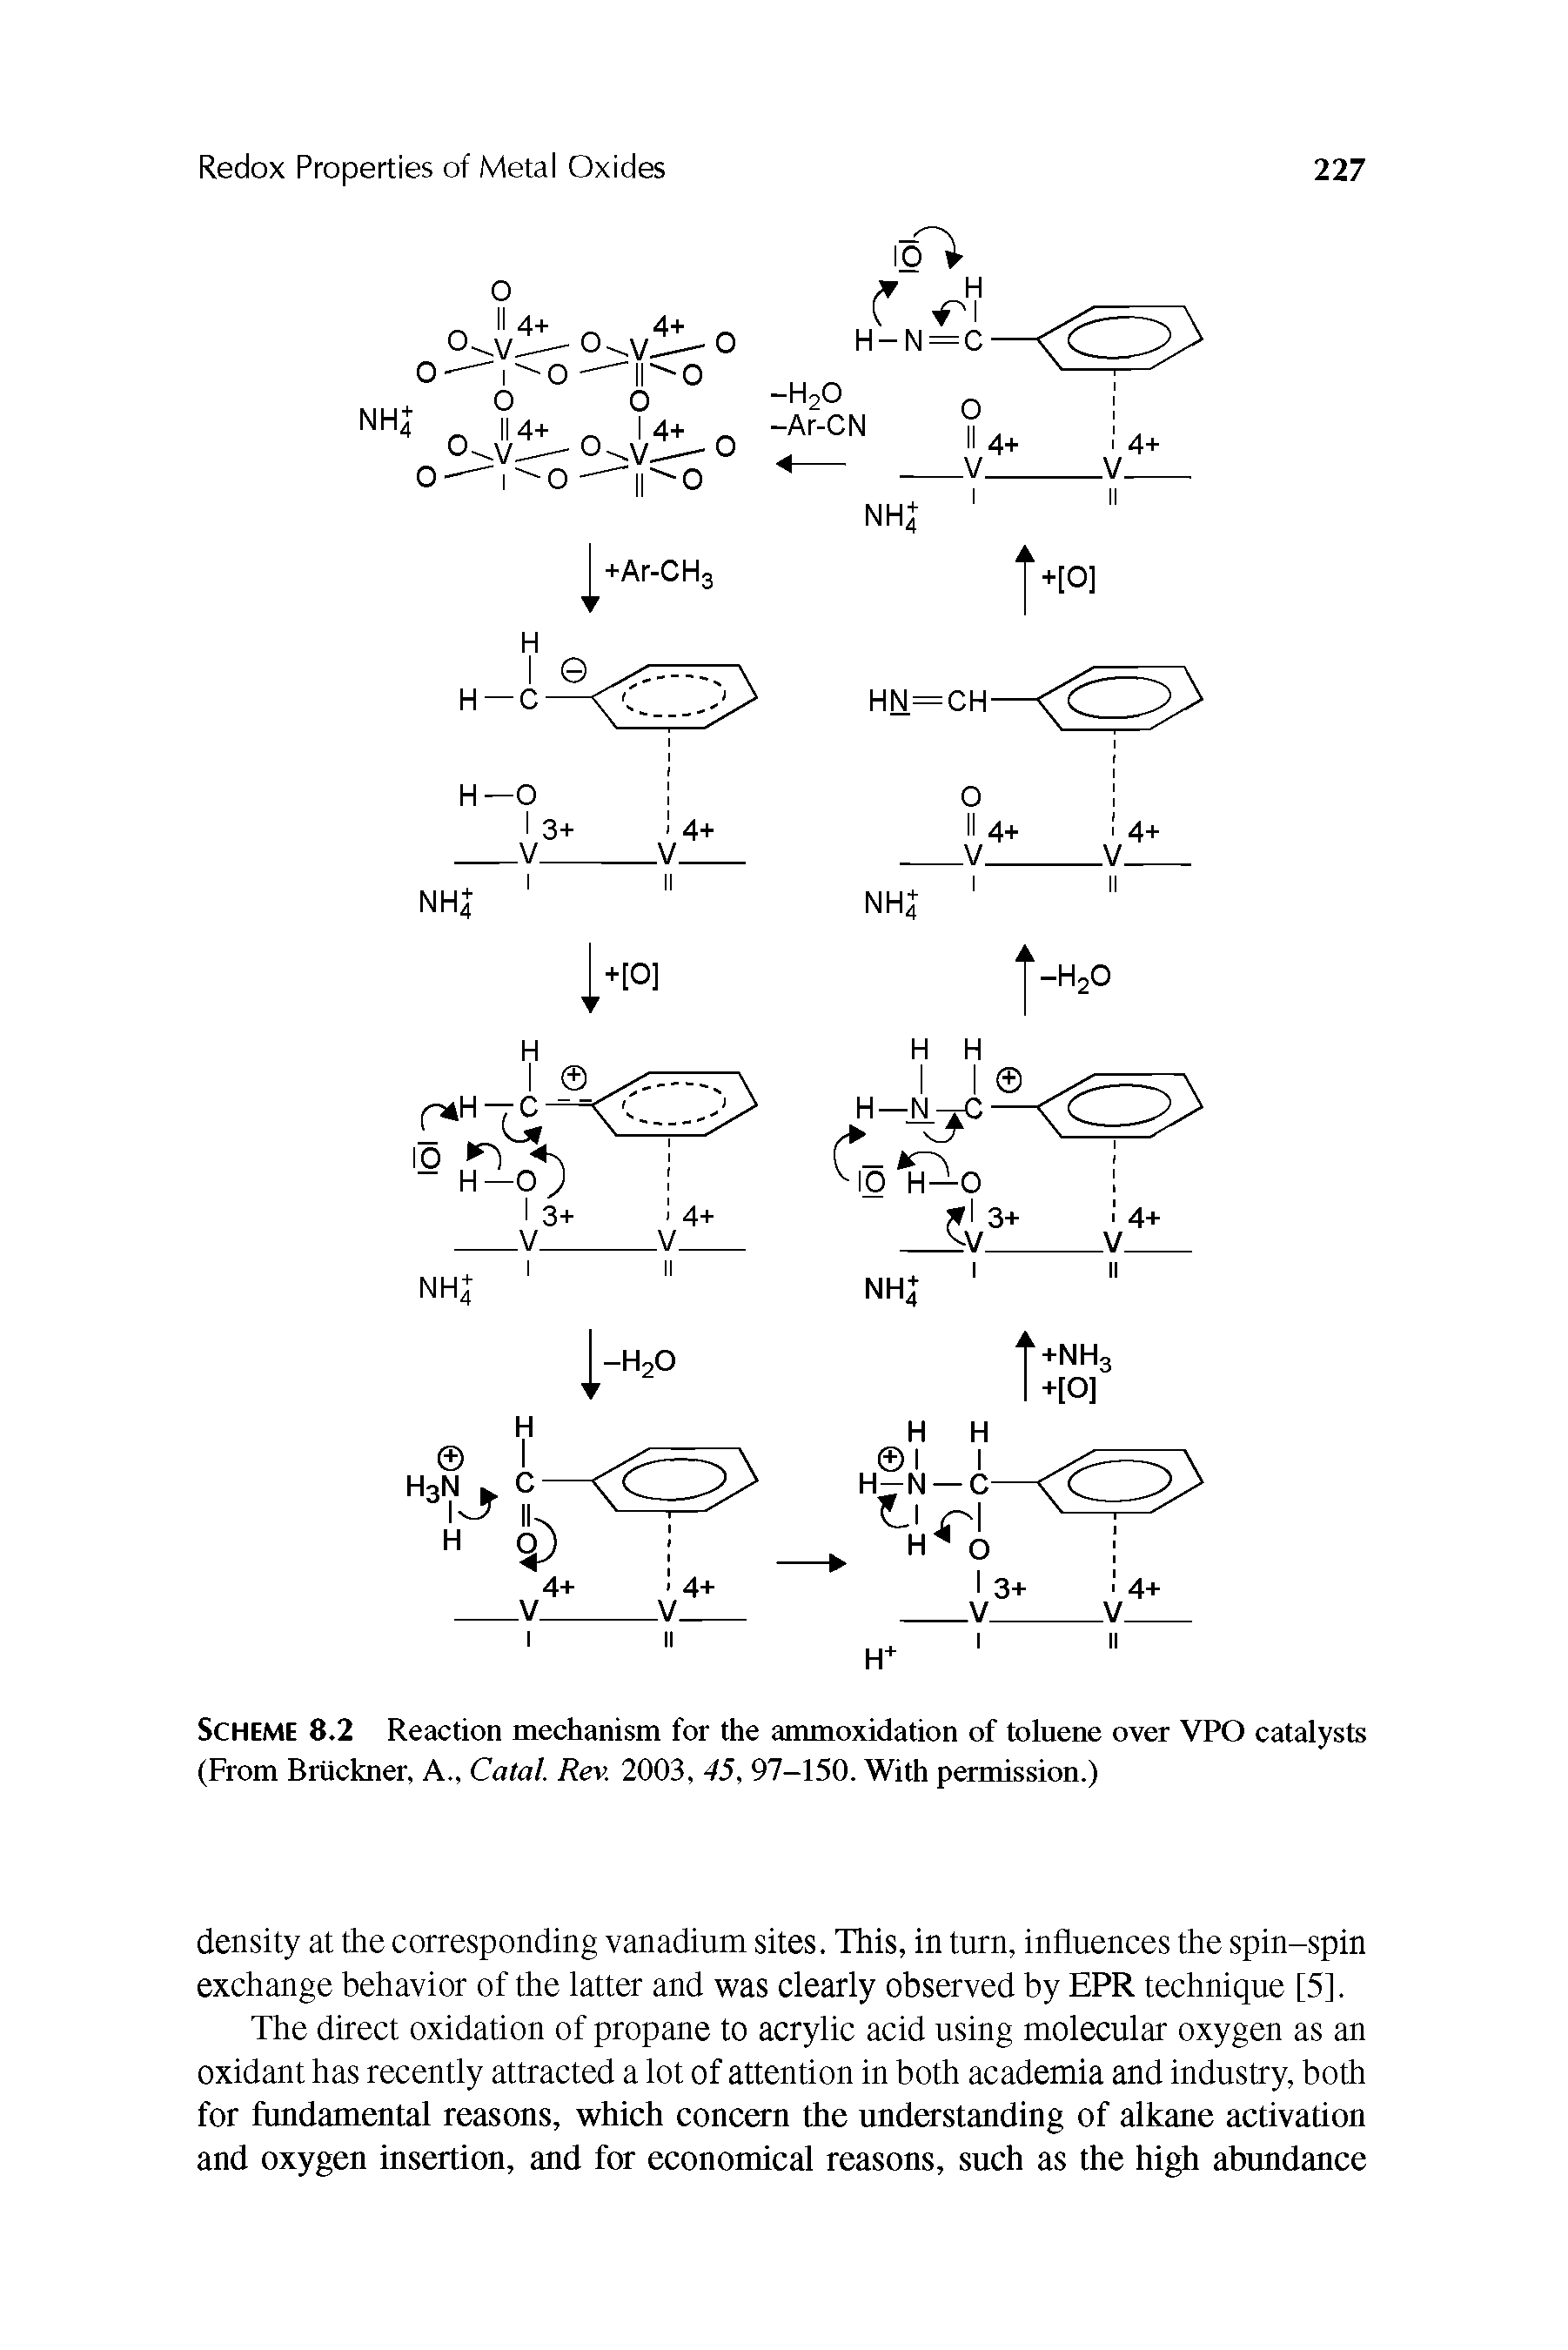 Scheme 8.2 Reaction mechanism for the ammoxidation of toluene over VPO catalysts (From Bruckner, A., Catal. Rev. 2003, 45, 97-150. With permission.)...